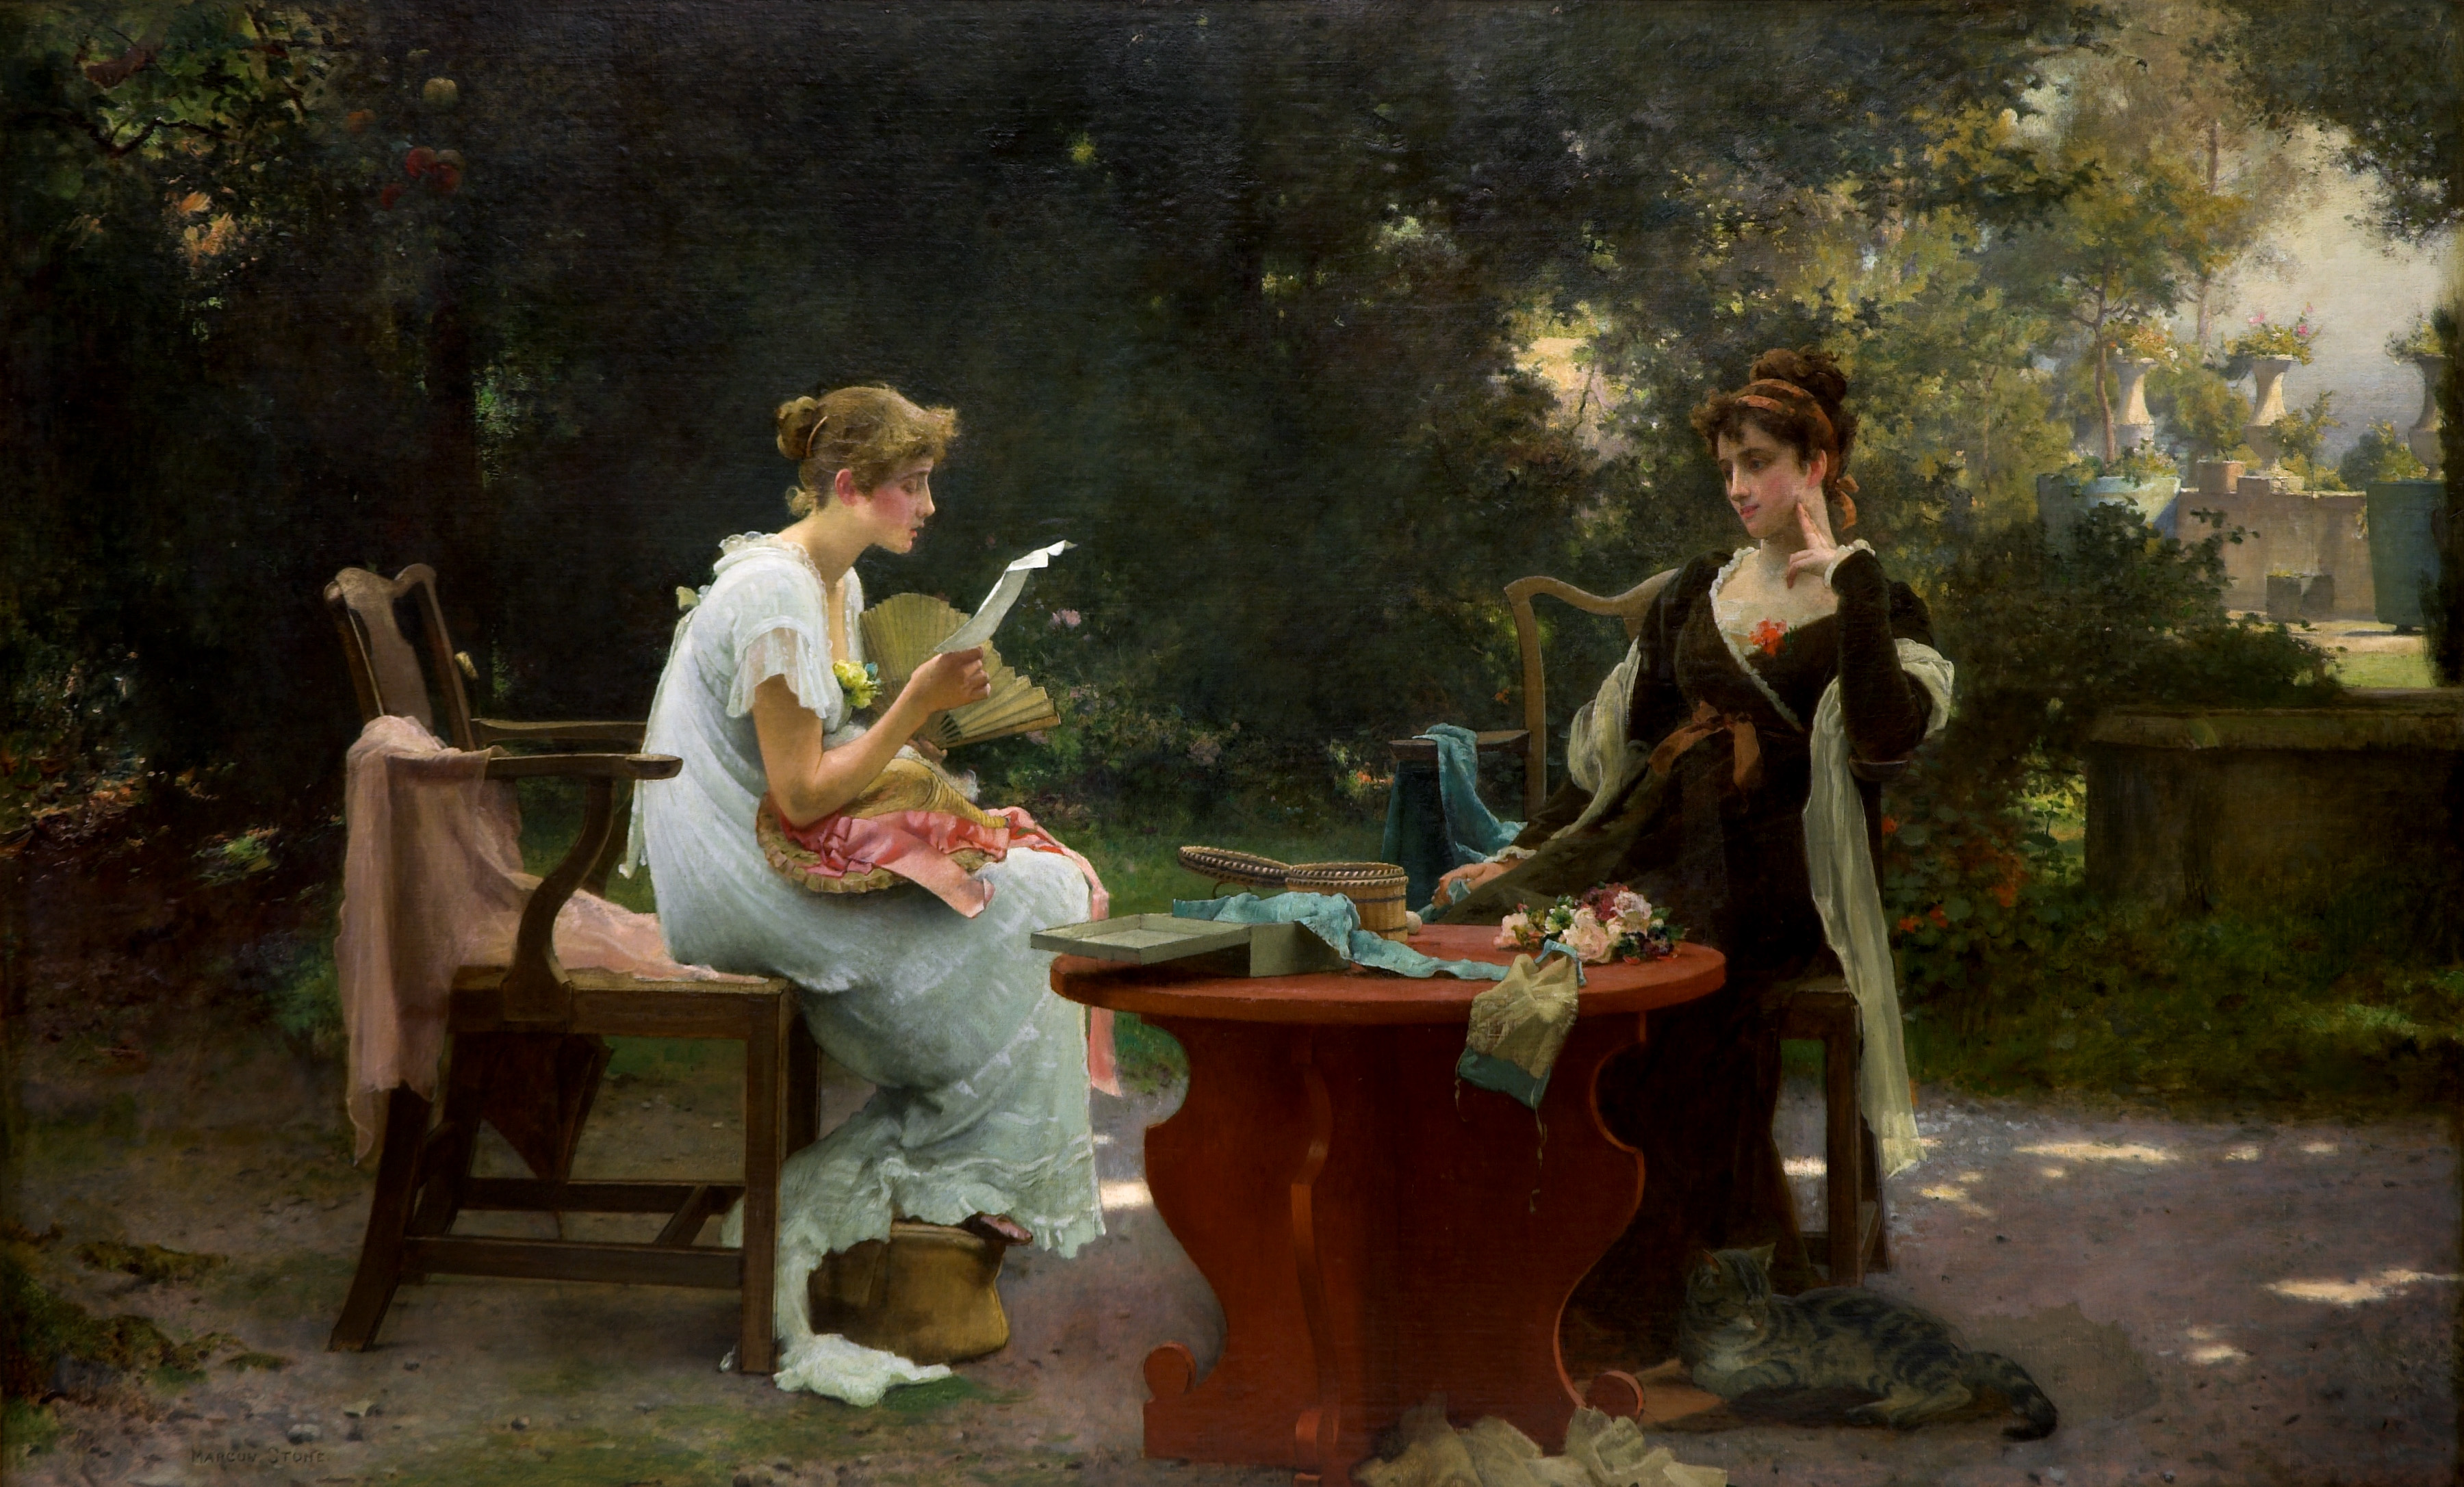 <p><strong>Marcus Stone,</strong> <em>Her First Love Letter,</em> 1889, oil on canvas. Auckland Art Gallery, gift of Moss Davis, 1930</p>